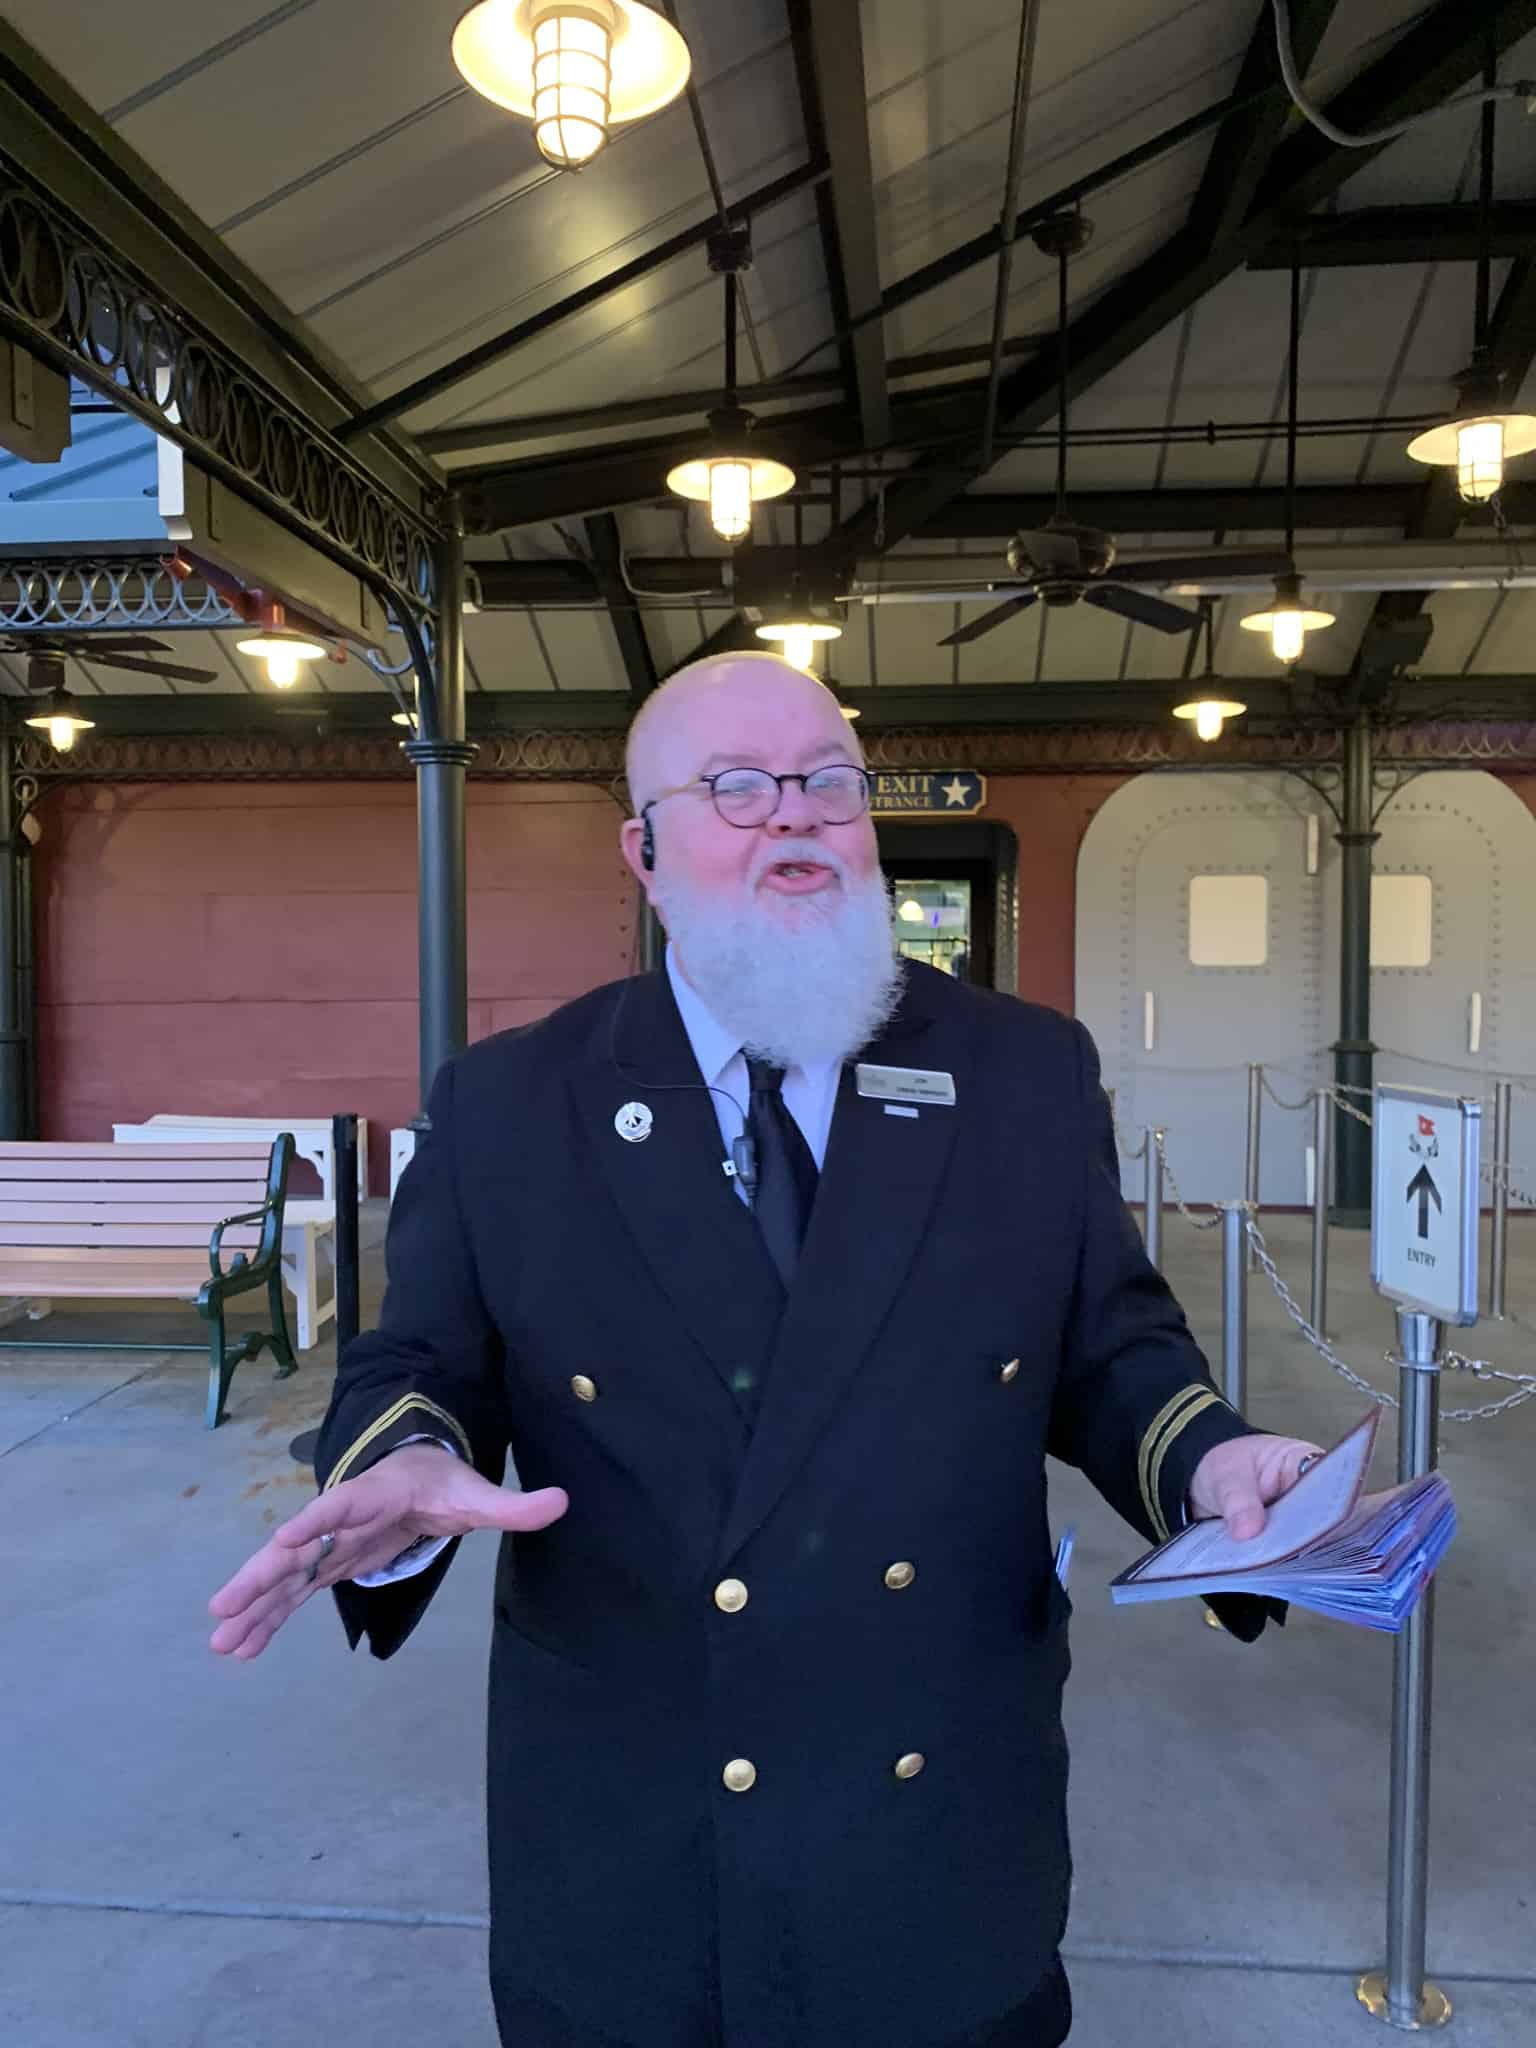 Captain Jim from the Titanic Museum Attraction, Branson